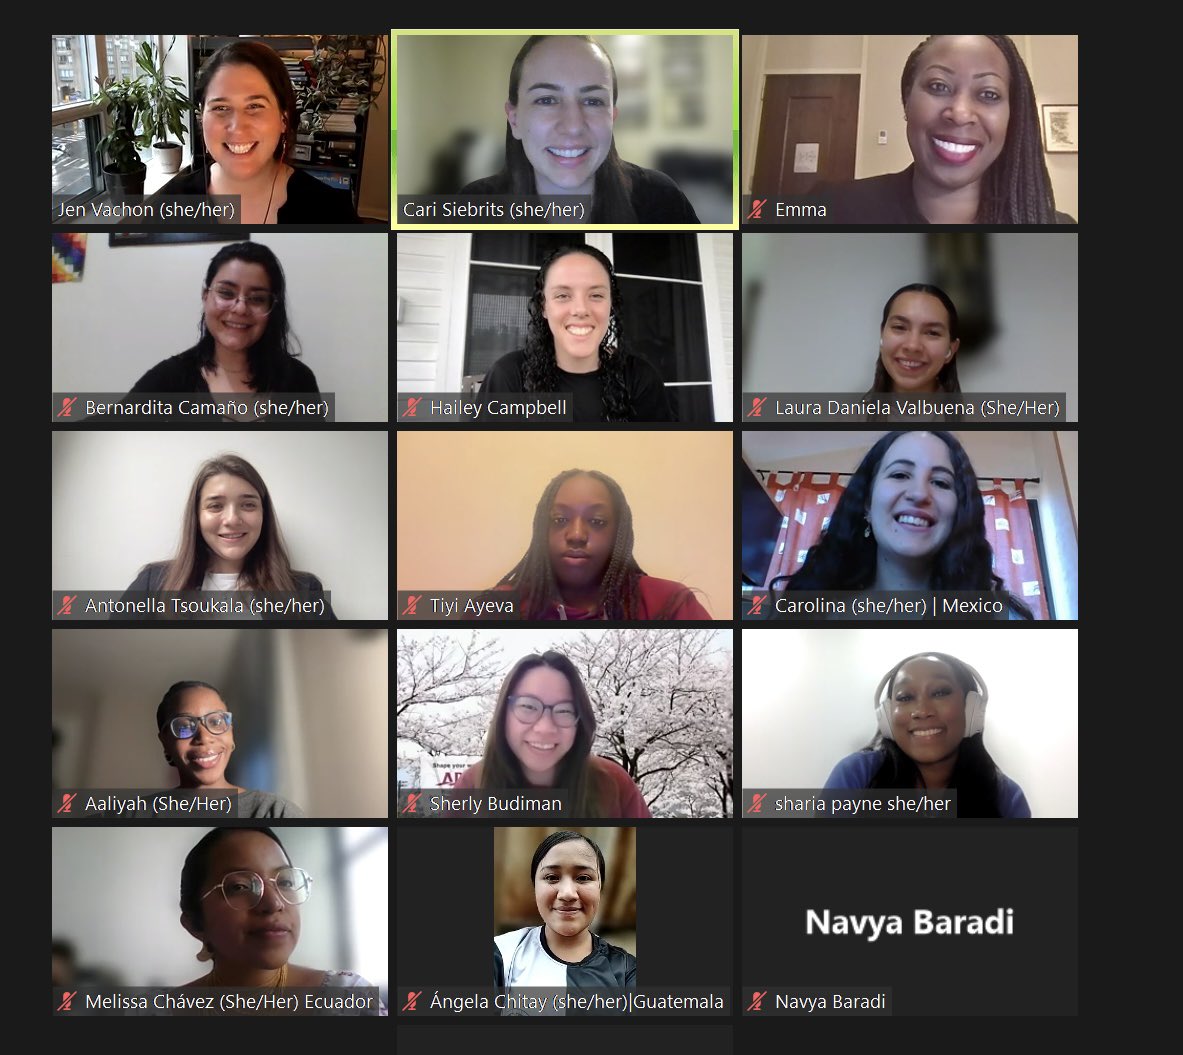 Last week, we kicked off our Global Summit program training with our 30 remarkable Delegates from around the world! If you haven’t met them yet, you can read their bios here: foranetwork.org/global-summit/… 🌍🫶